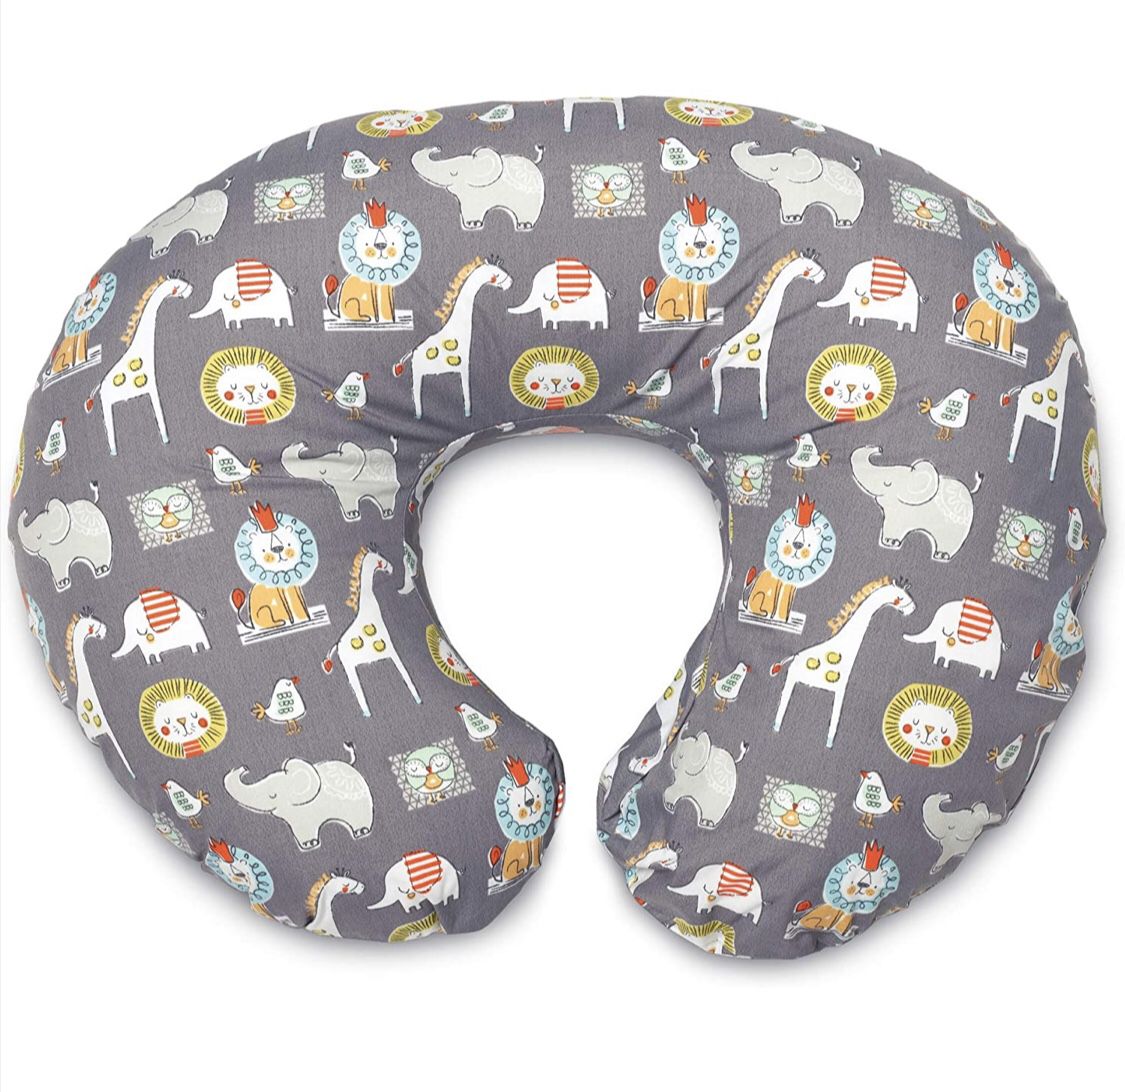 Boppy Feeding pillow with cover